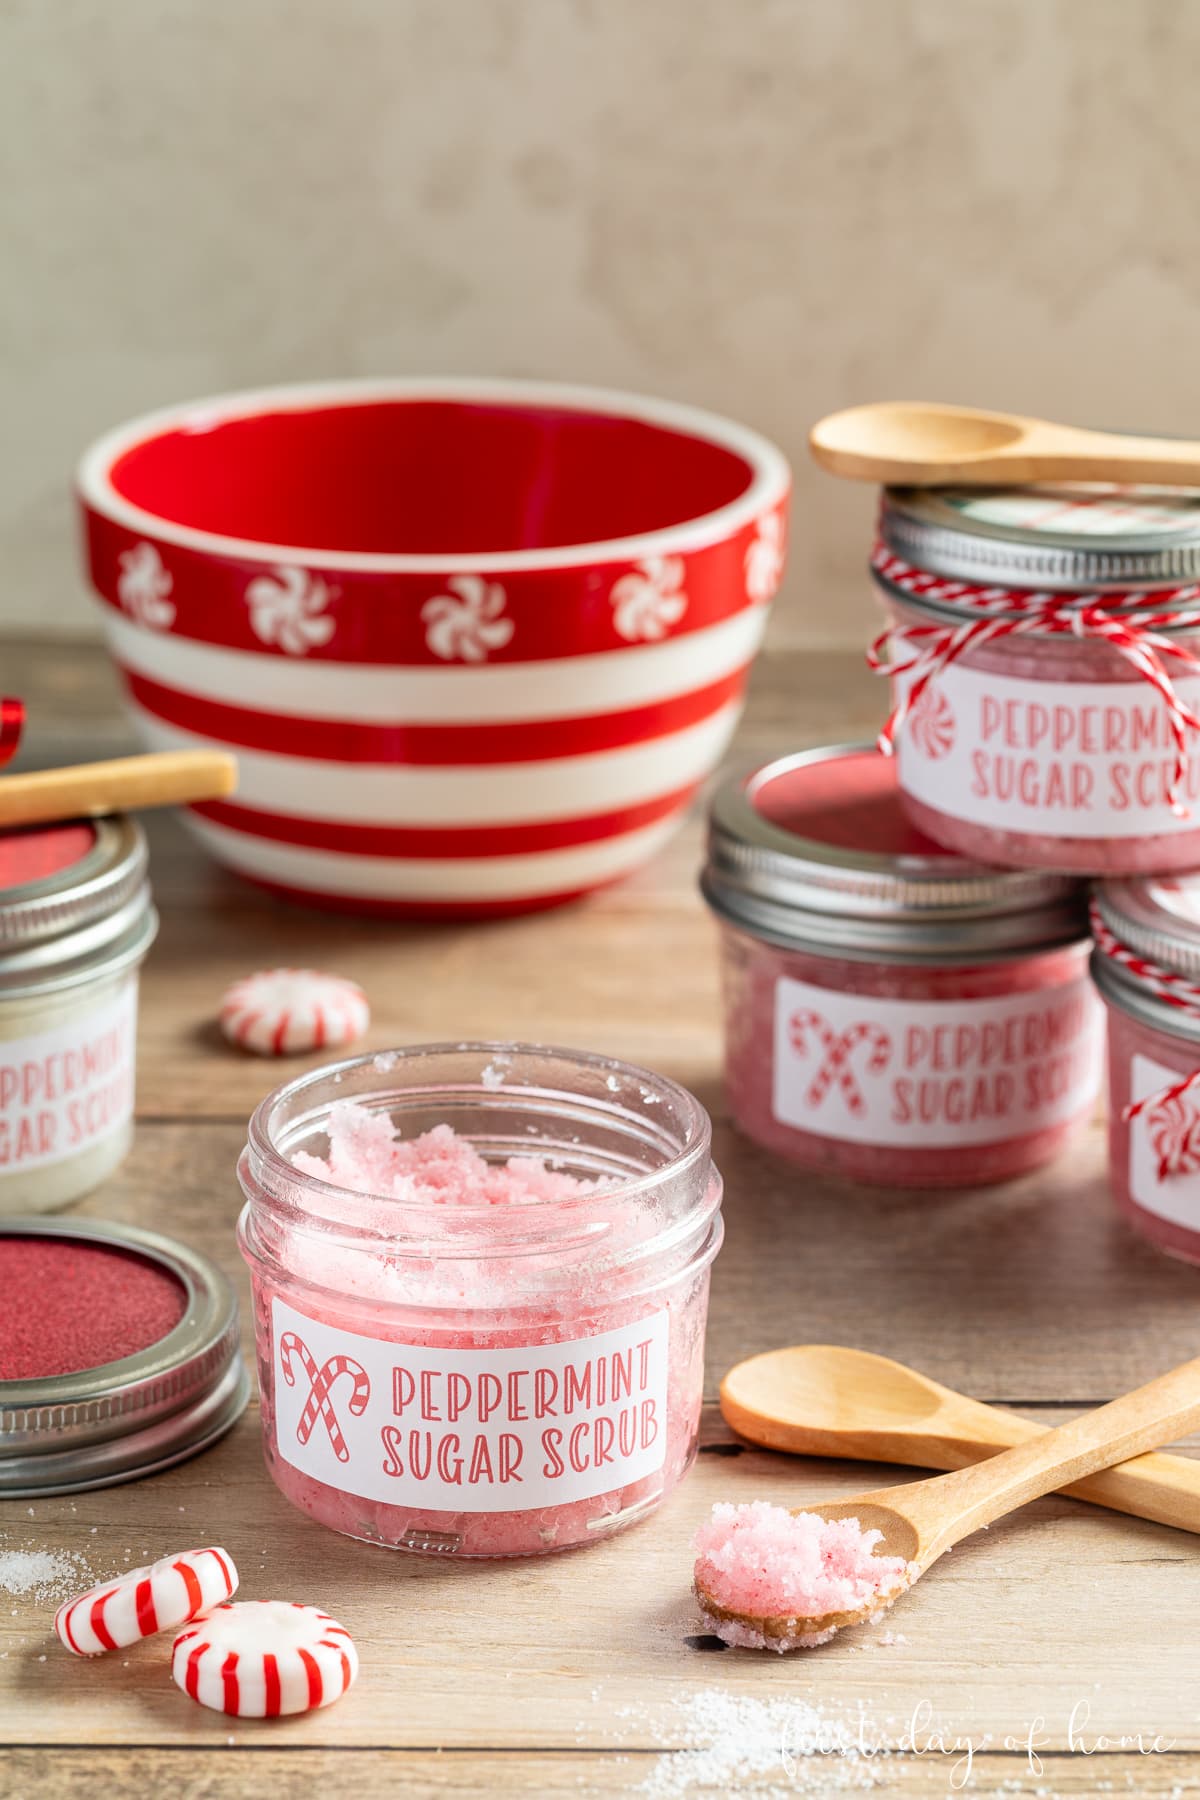 Peppermint sugar scrub in mason jars with wooden spoons.